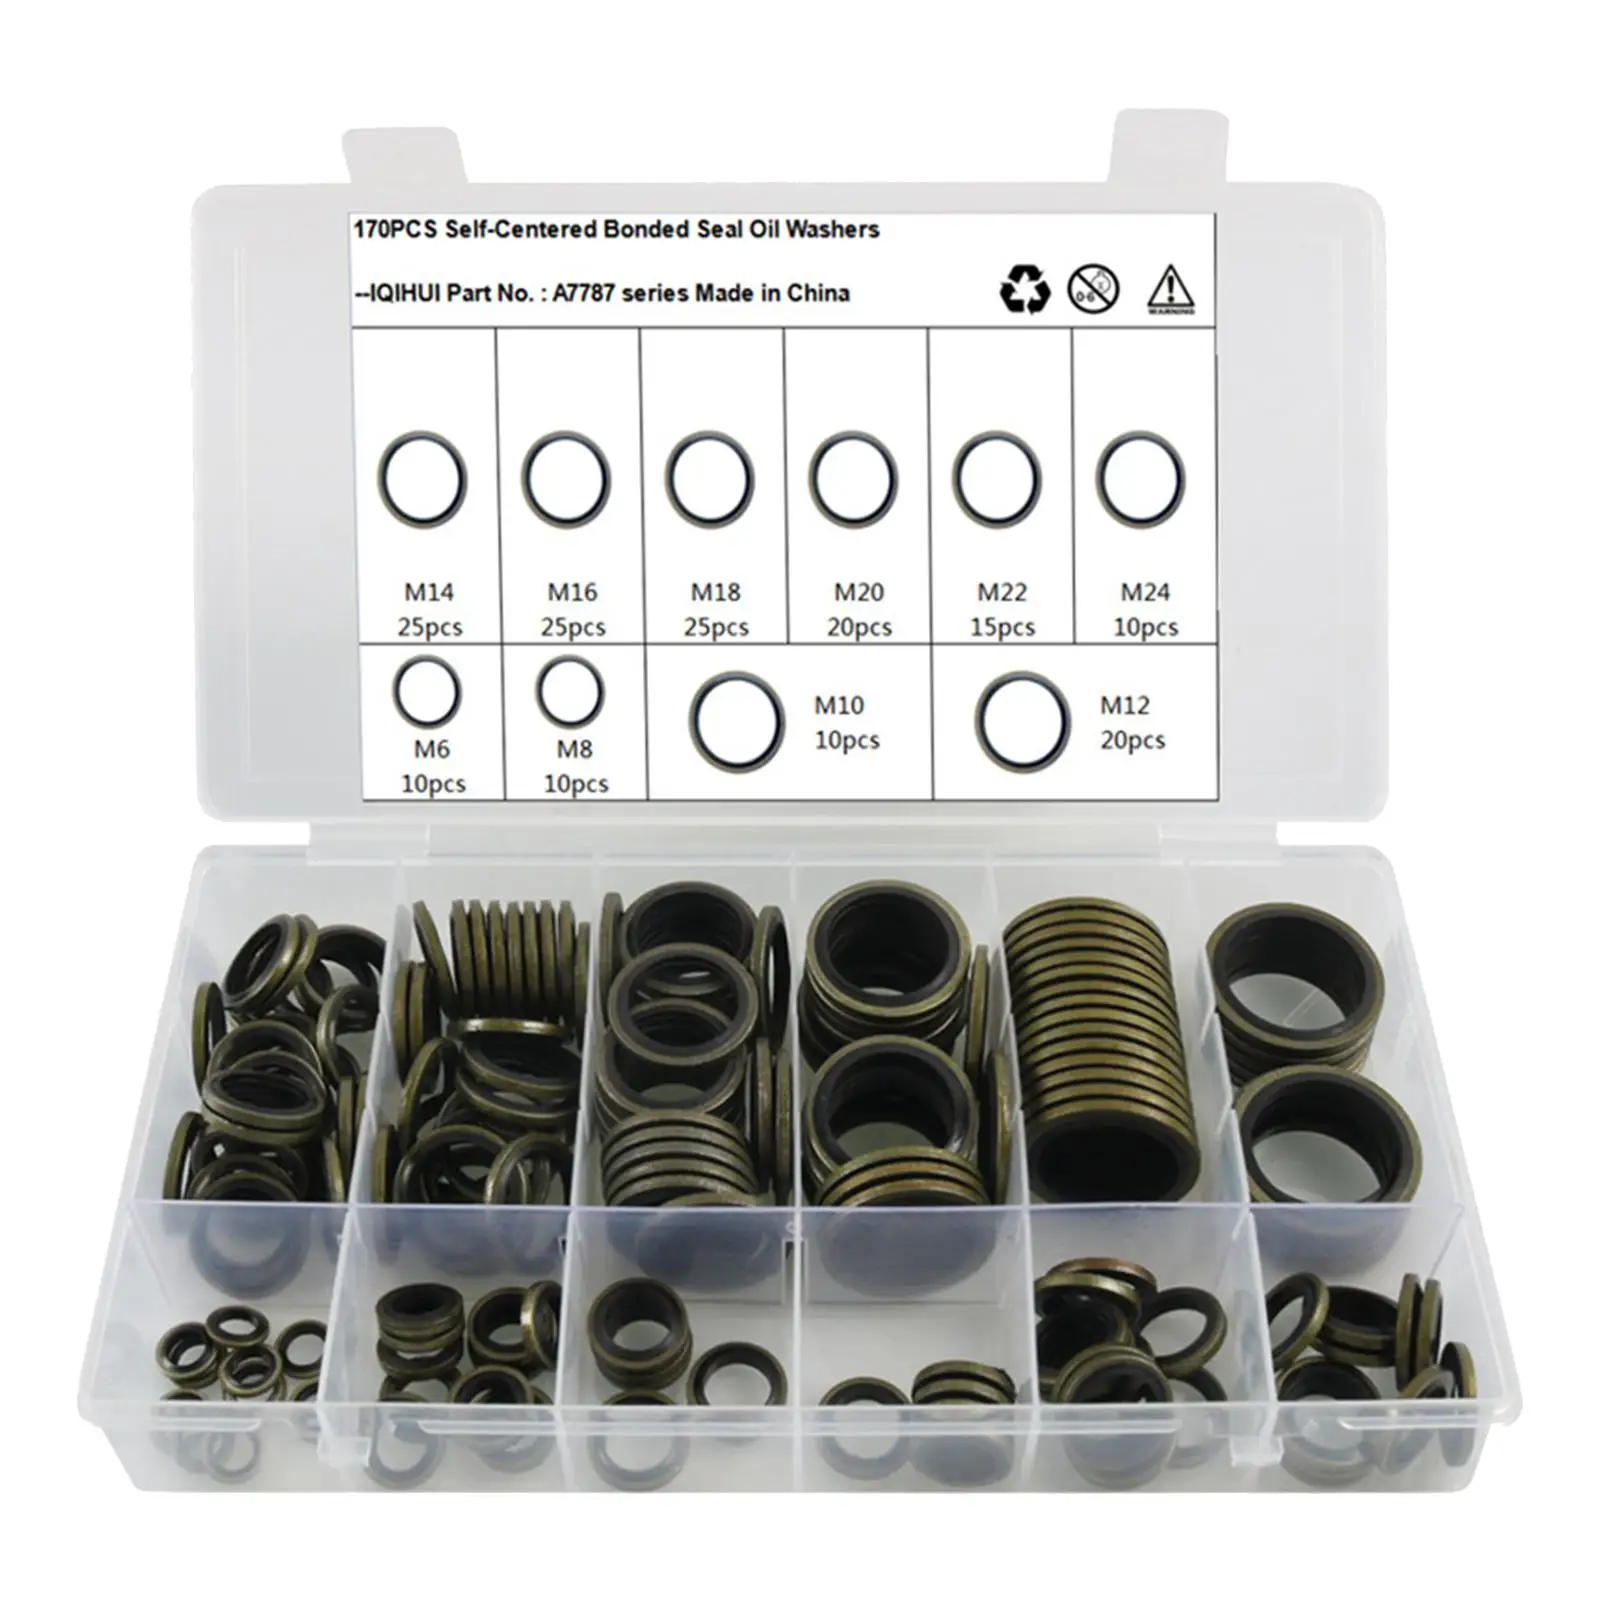 170 Pieces Rubber O Rings Set 10 Sizes Durable with Storage Box M6 M8 M10 M12 M14 M16 M18 M20 M22 M24 for Automotive Mechanic